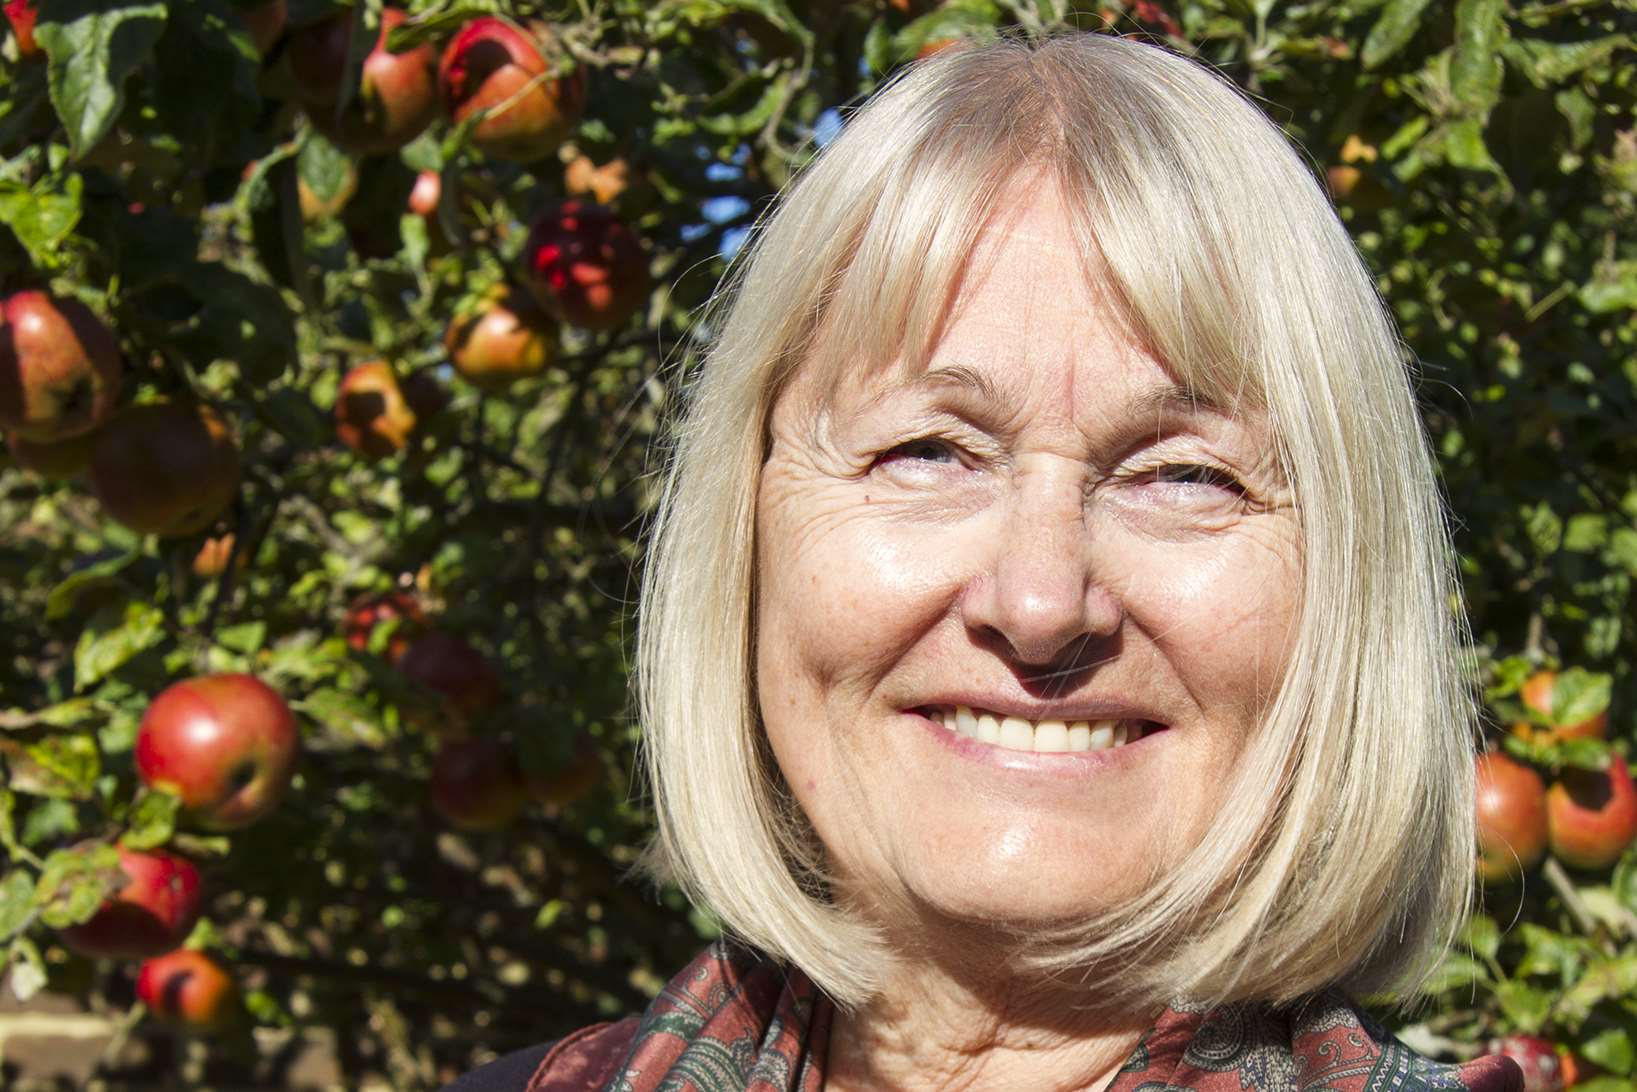 Janice Aldous has been selected for the Conservatives